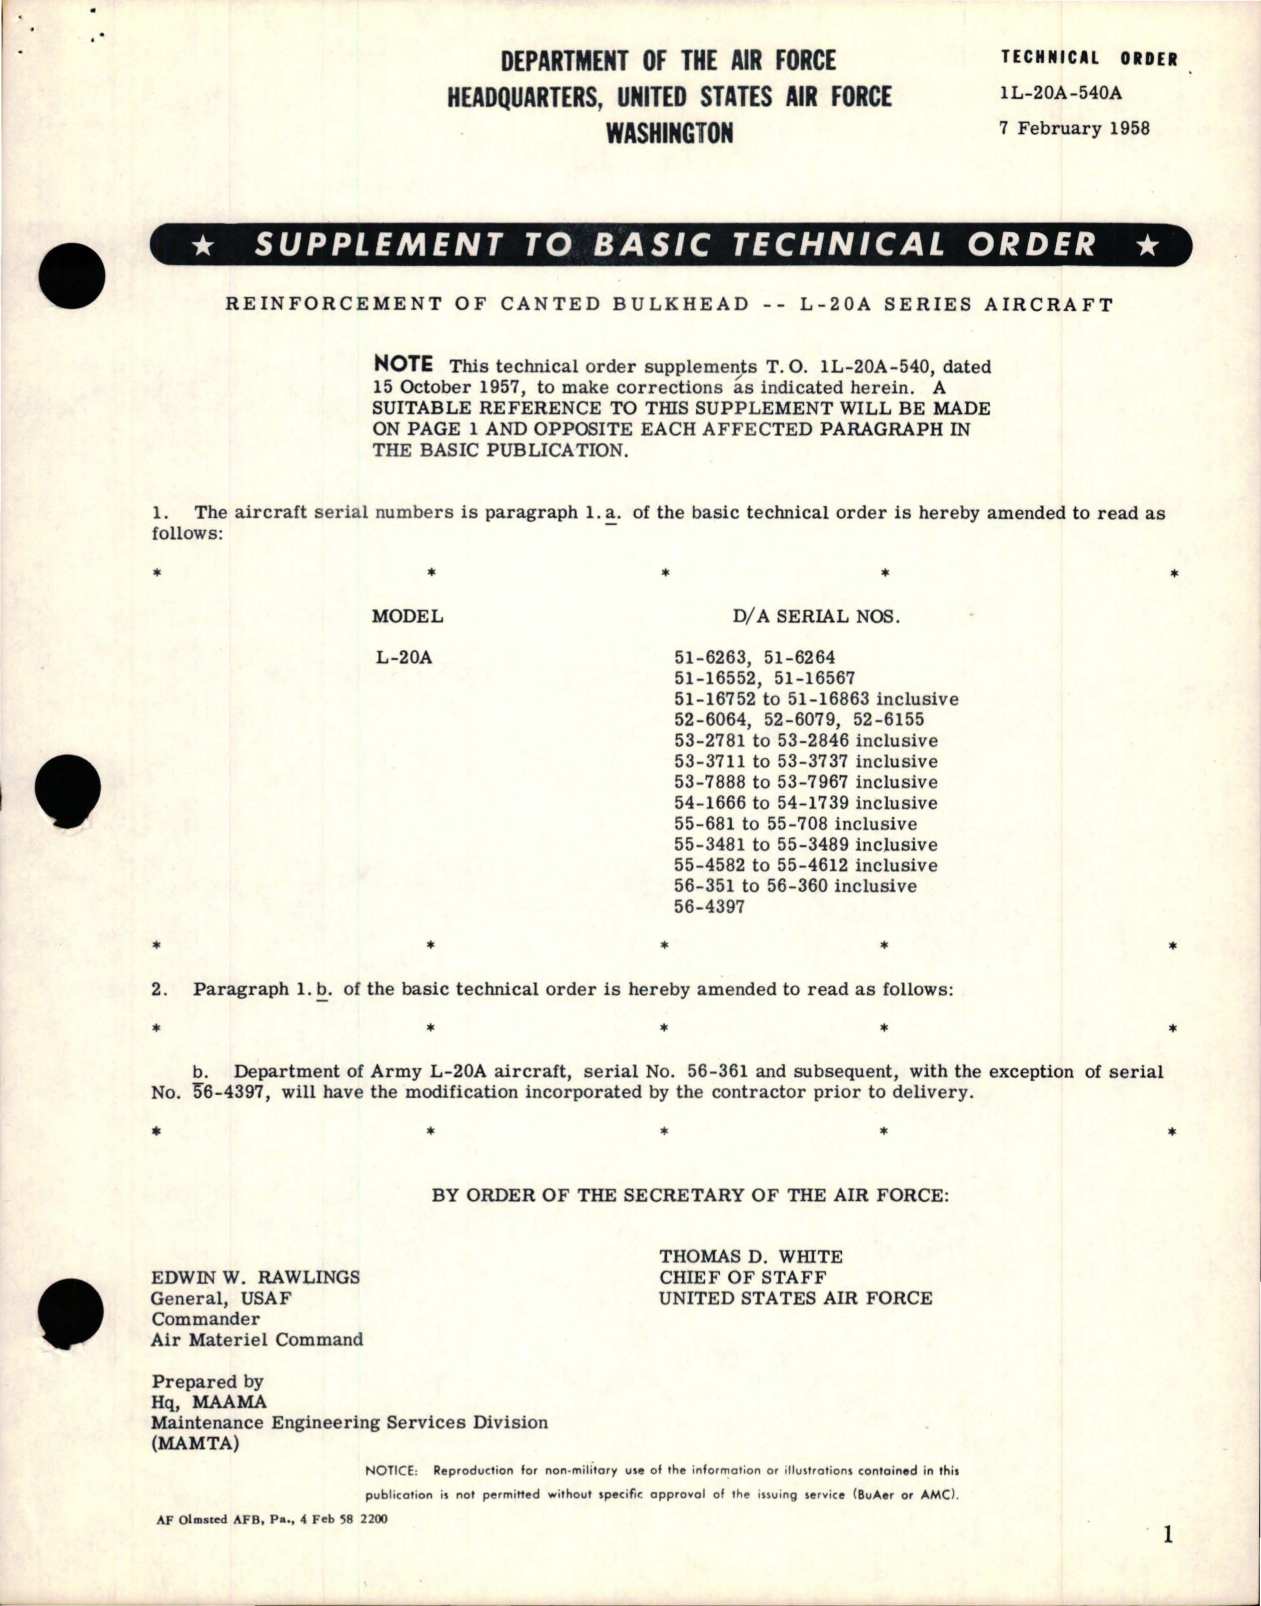 Sample page 1 from AirCorps Library document: Supplement to Reinforcement of Canted Bulkhead - L-20 Series